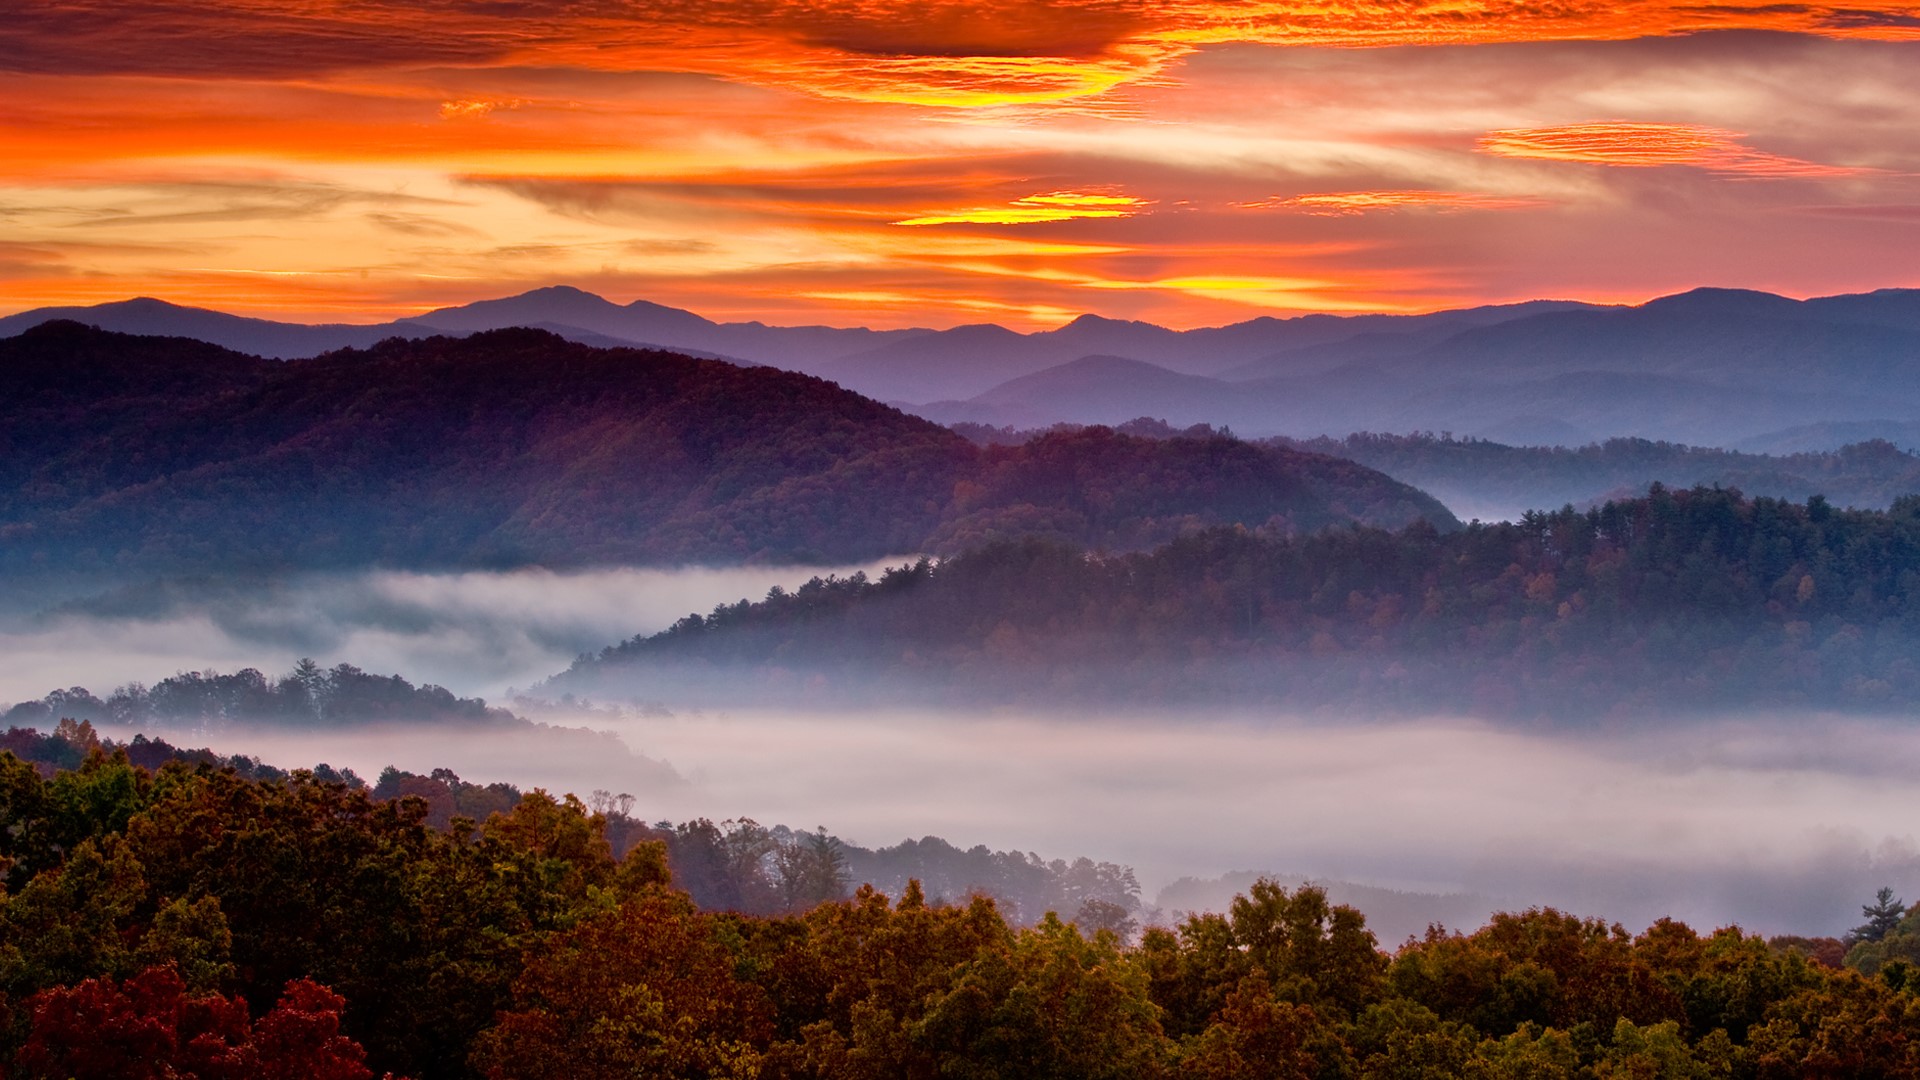 Sunrise over the Smoky Mountains in autumn from the Foothills Parkway